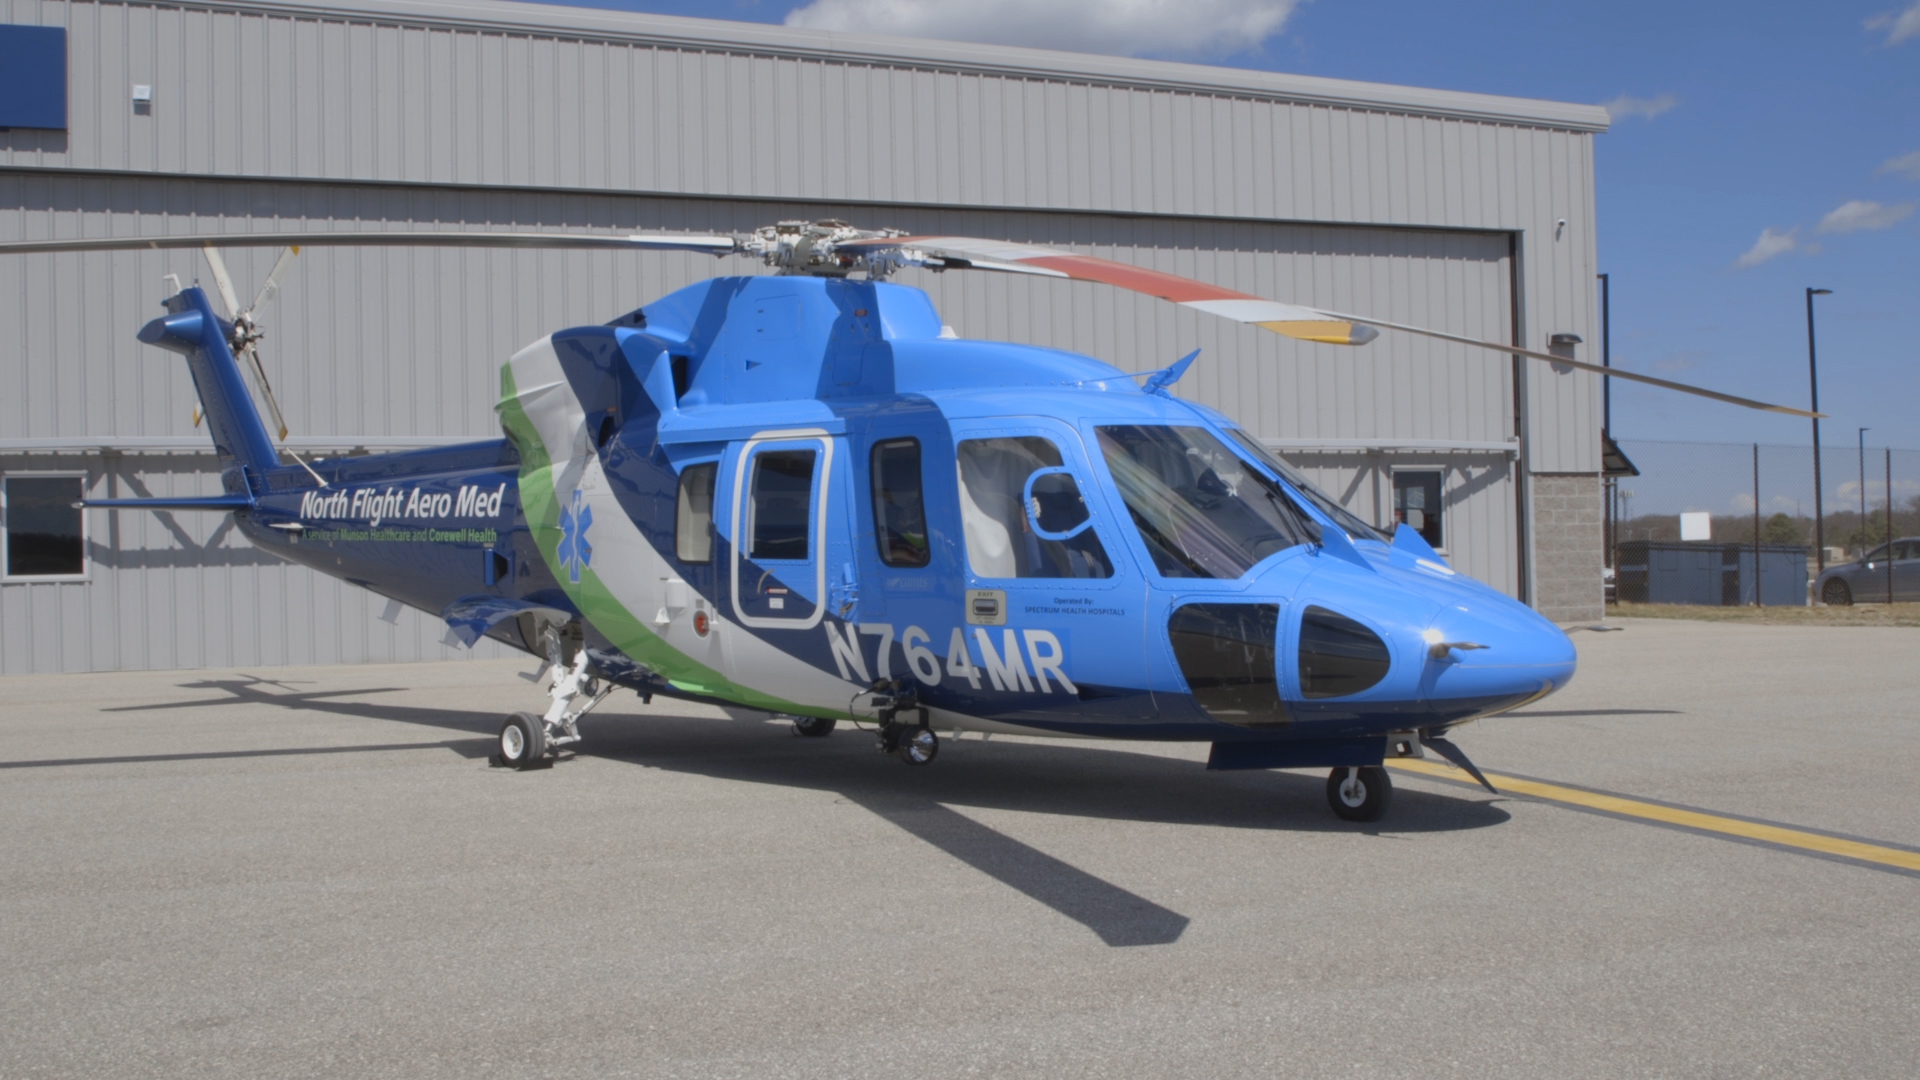 North Flight Aero Med adds helicopter to their fleet